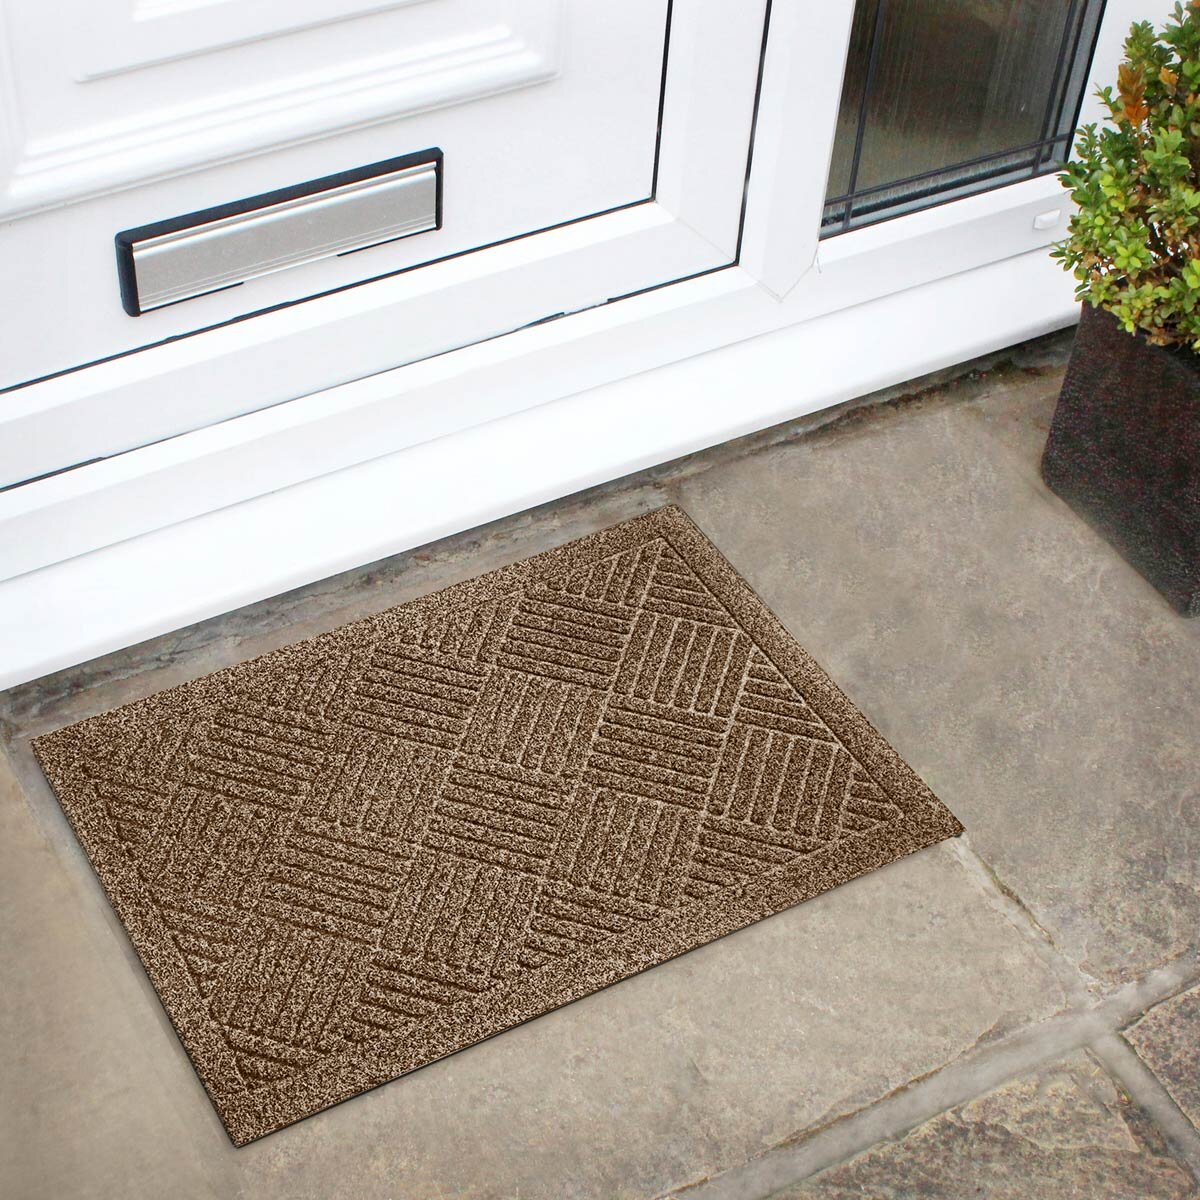 Lifestyle image of mats outside front door